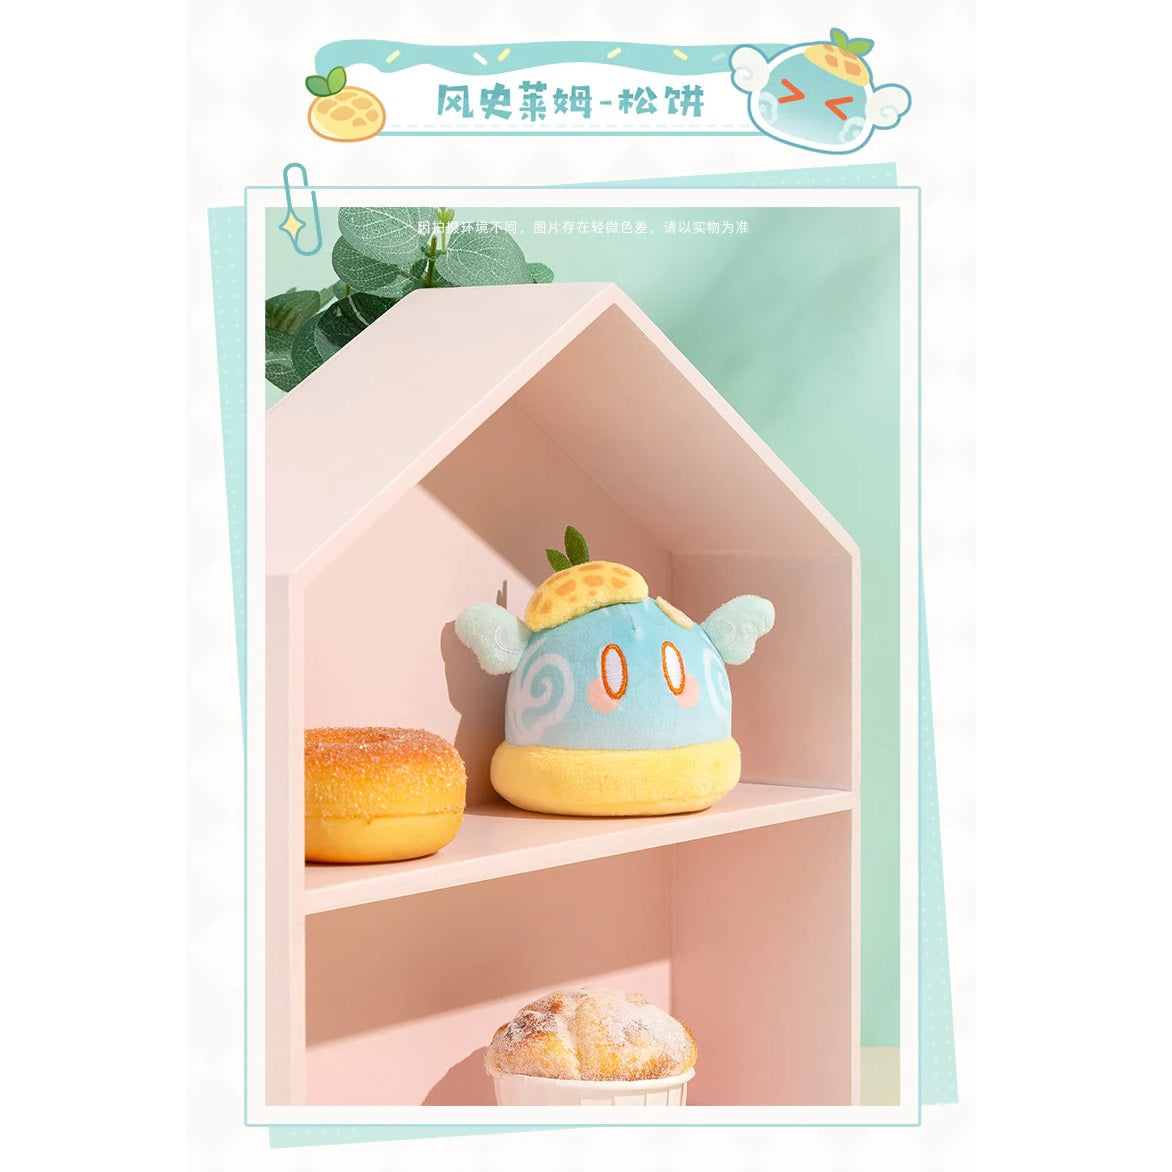 miHoYo -Genshin Impact- Dessert Party Squishy Plushie "Slime"-Anemo Slime-miHoYo-Ace Cards & Collectibles